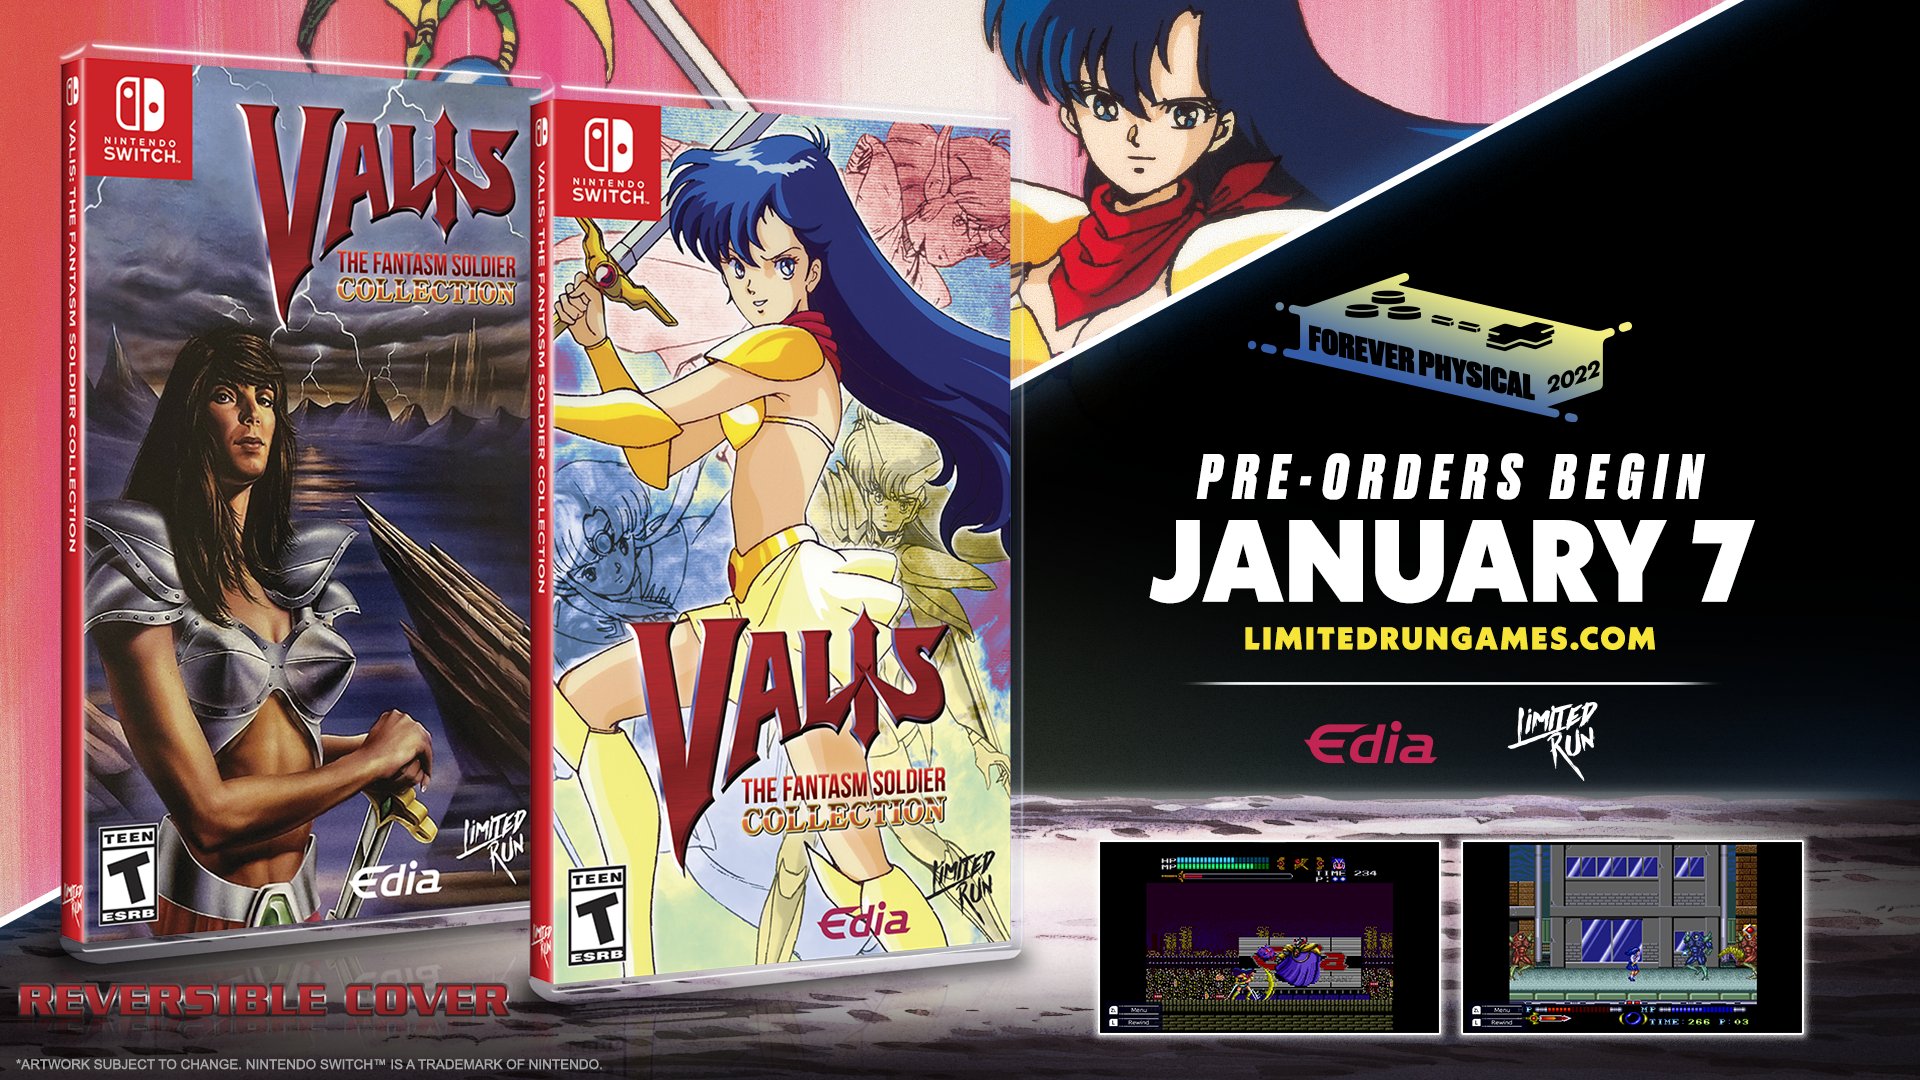 Valis: The Fantasm Soldier Collection English Physical Release